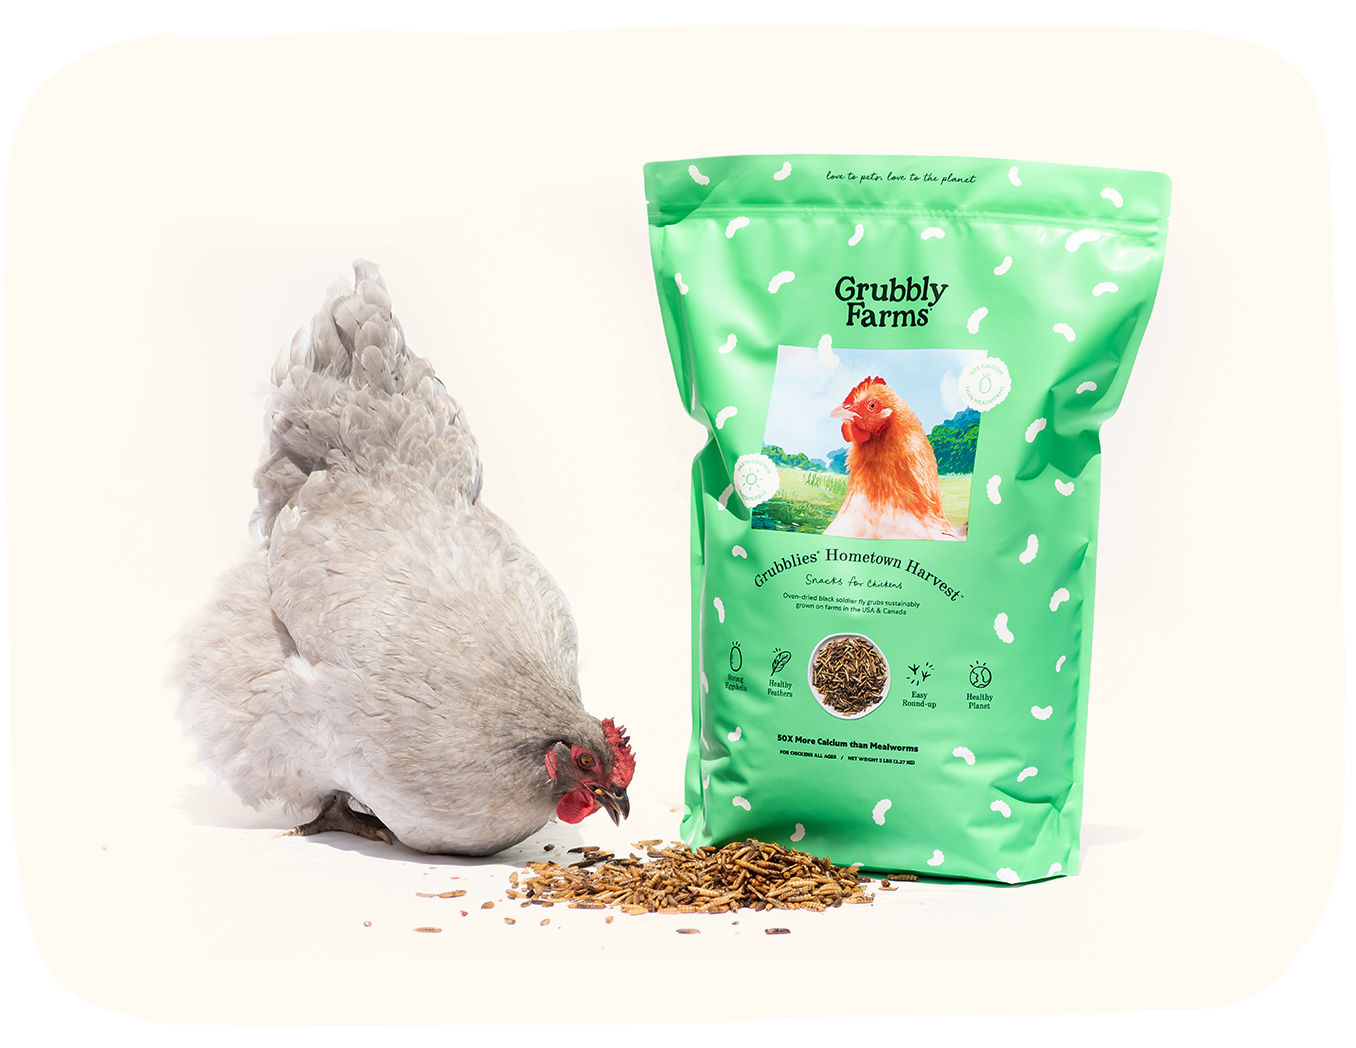 A chicken pecking at grains next to a bag of chicken feed.